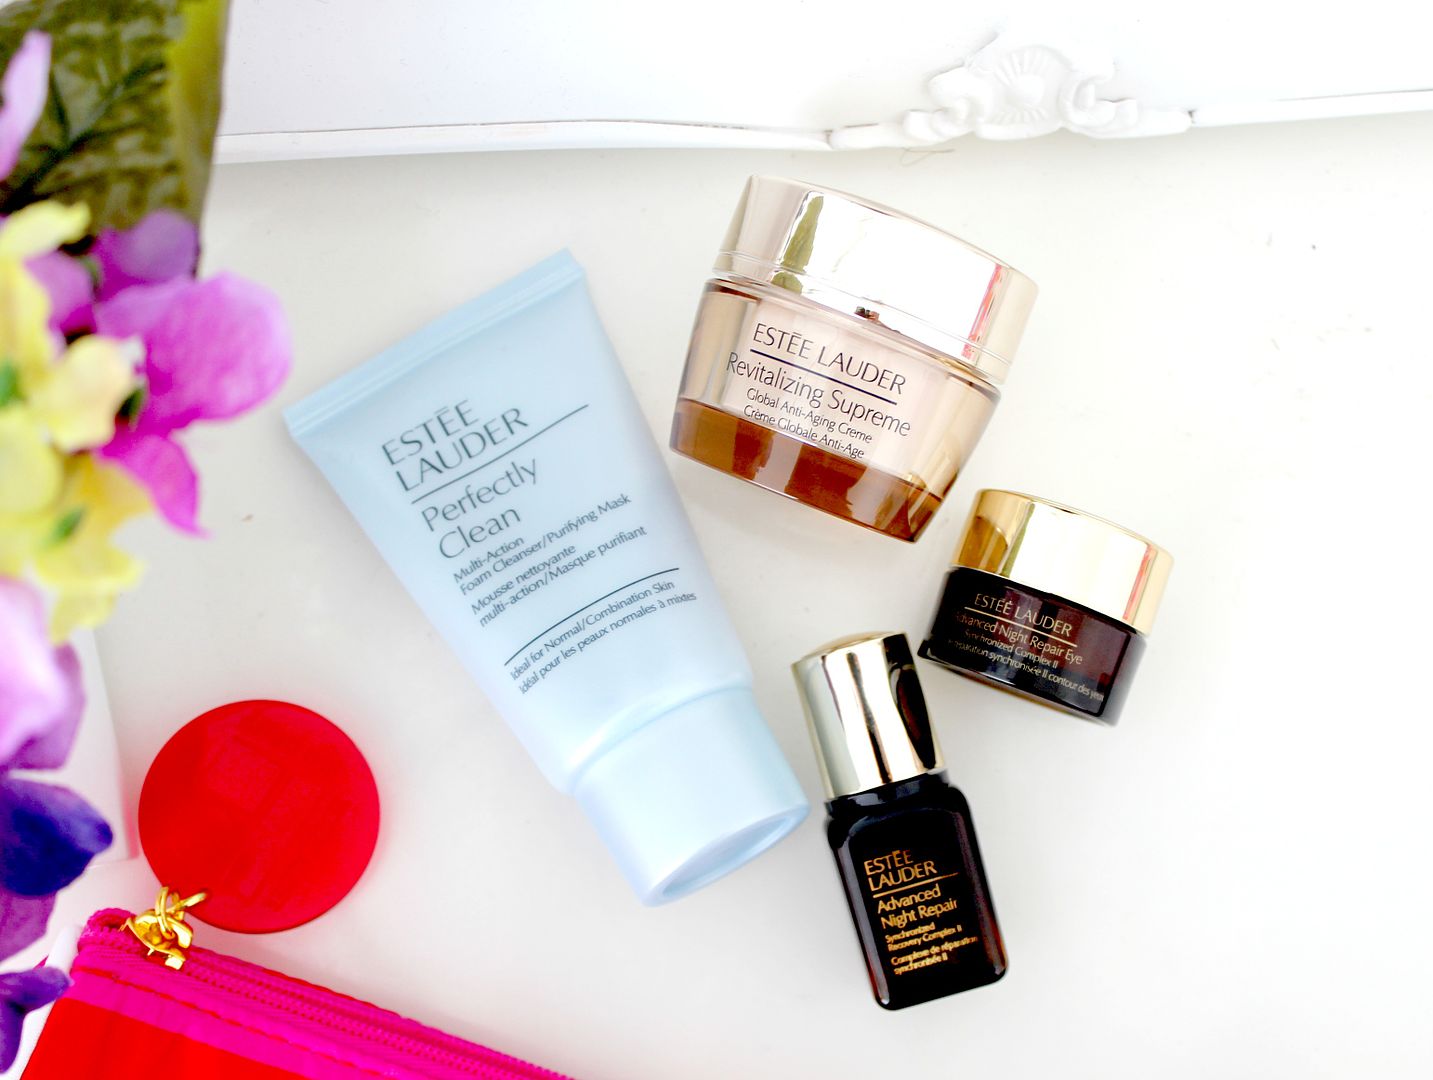 House of Fraser Exclusive Estee Lauder Gift, House of Fraser Gift With Purchase, Estee Lauder Offer